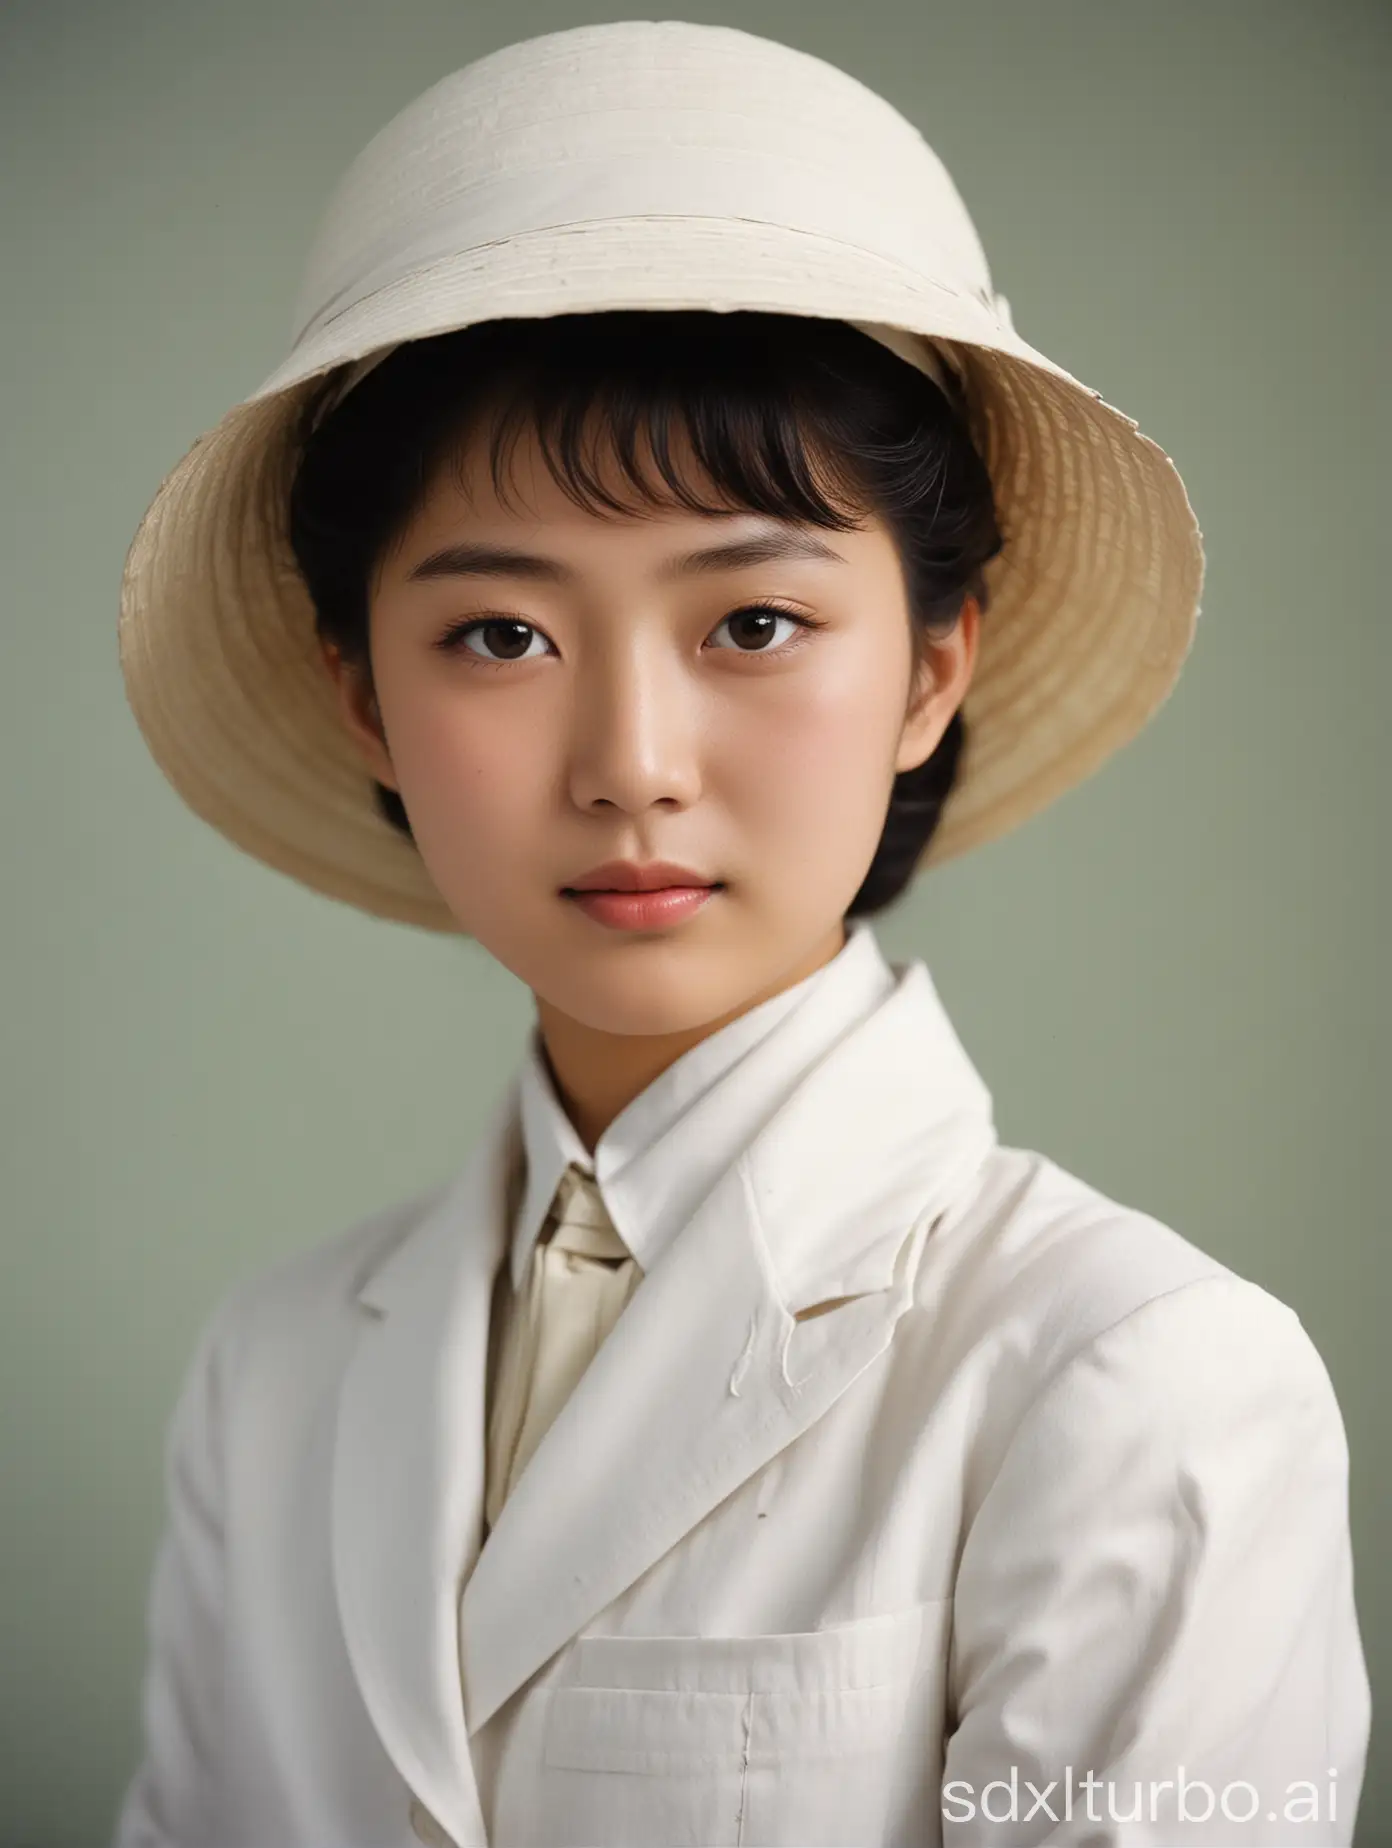 A color head photo of a 19 years old young Japanese woman in a White suit and a white pith helmet 1955